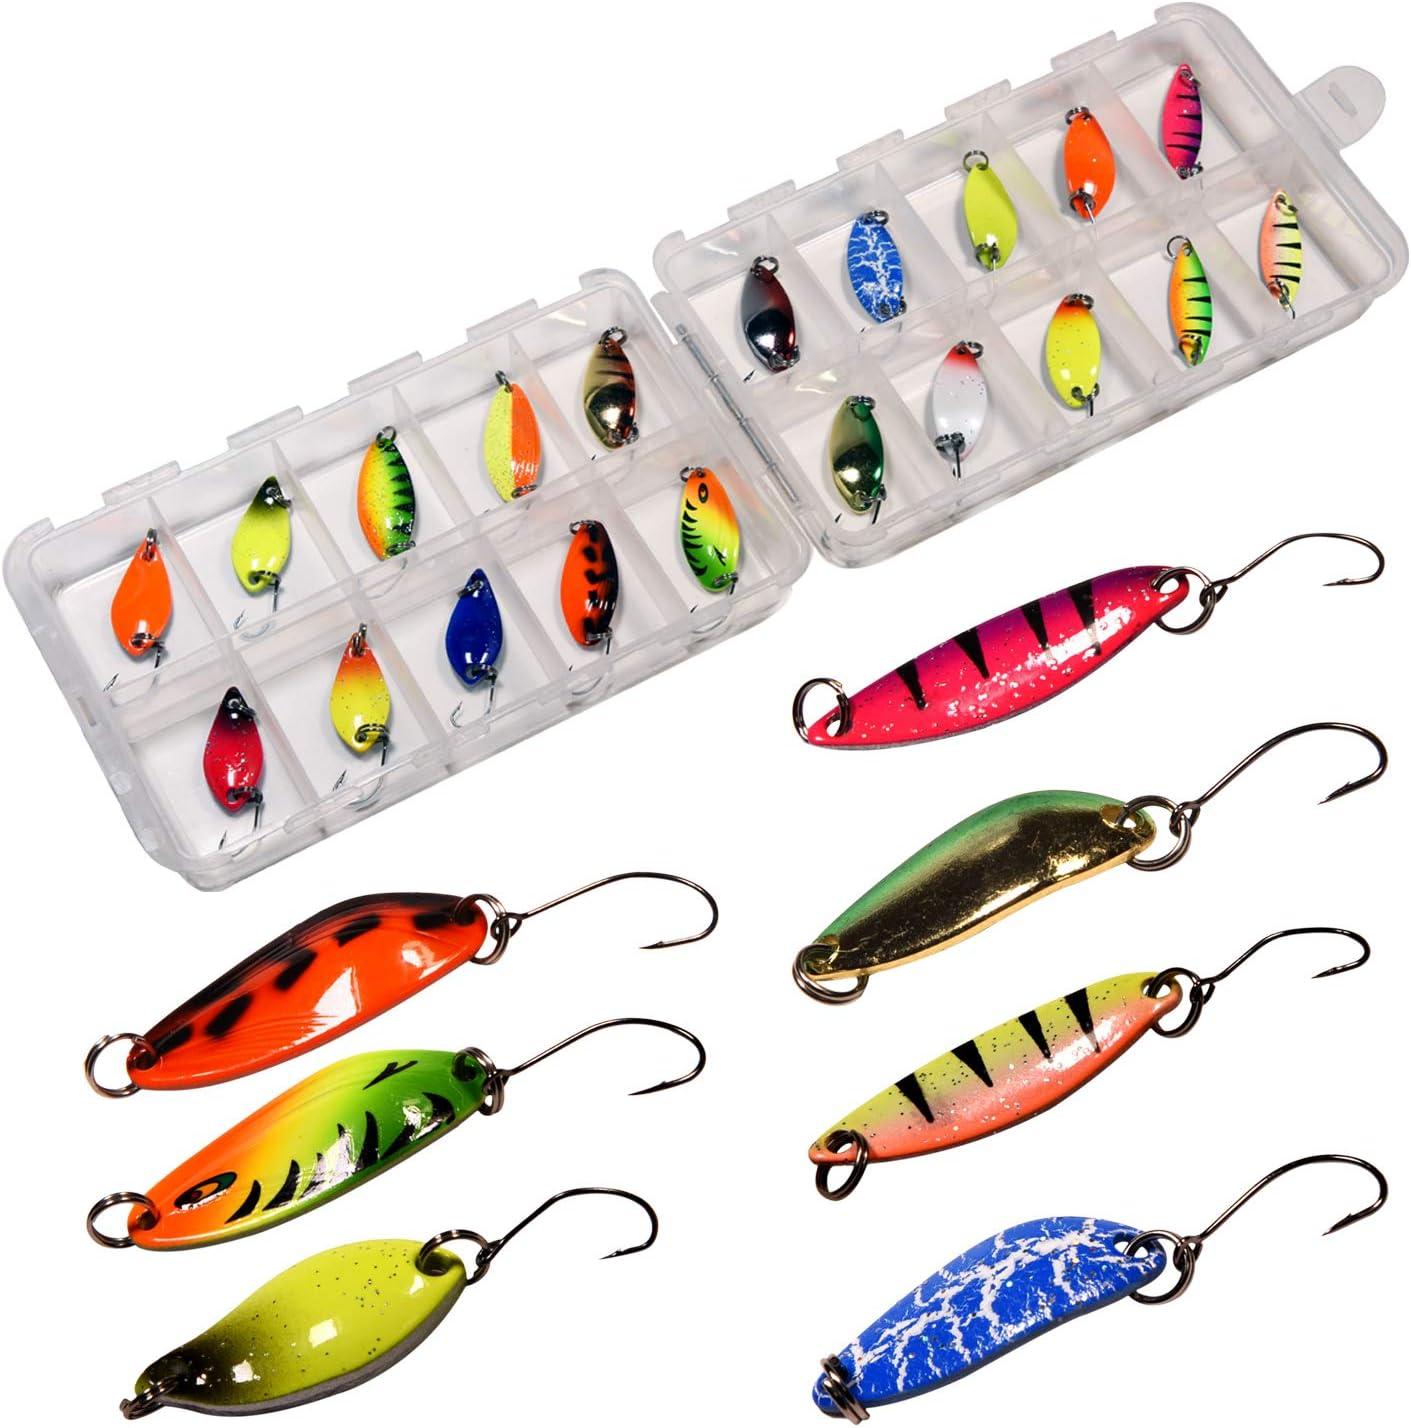 THKFISH Fishing Lures Fishing Spoons Fishing Bait Trout Lures